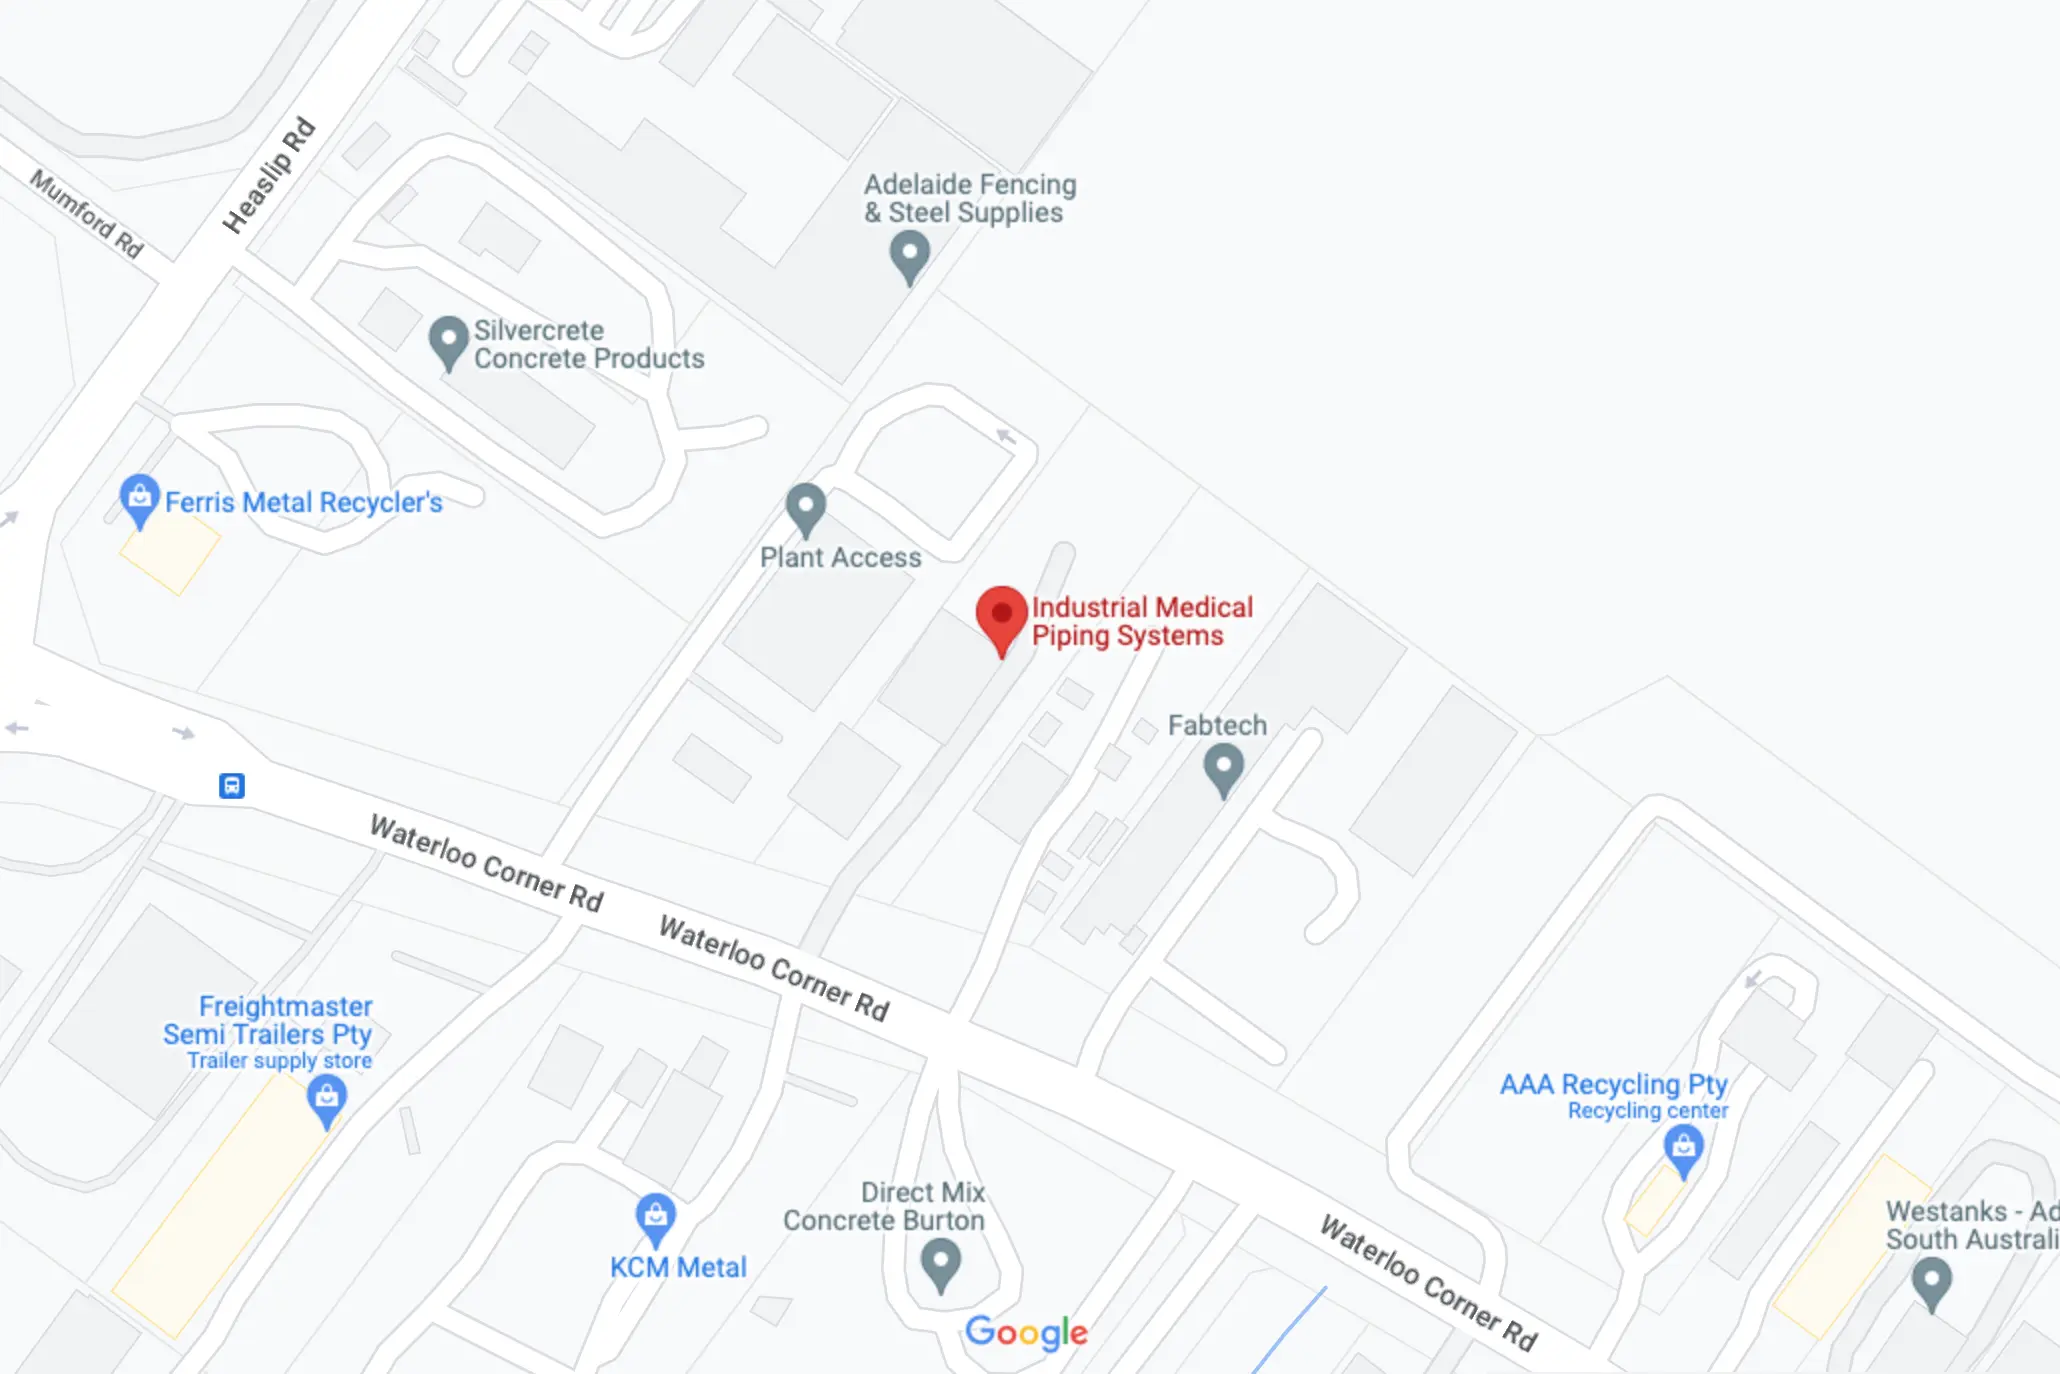 Google maps screenshot of the location of Industrial Medical Piping Systems.